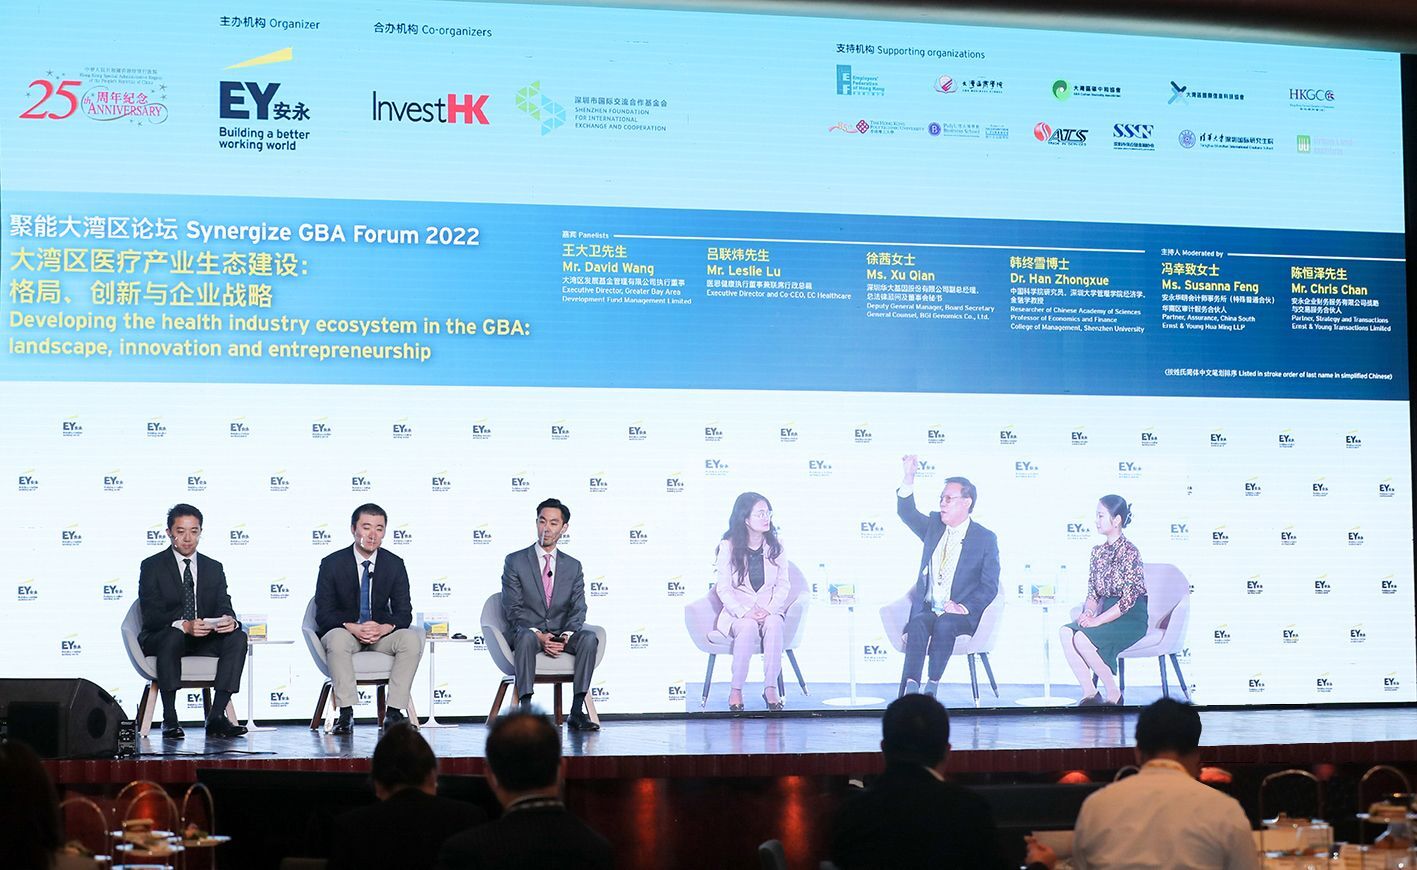 Mr. Leslie Lu, Co-CEO of EC Healthcare Attended Synergize GBA Forum 2022 as a Guest Speaker